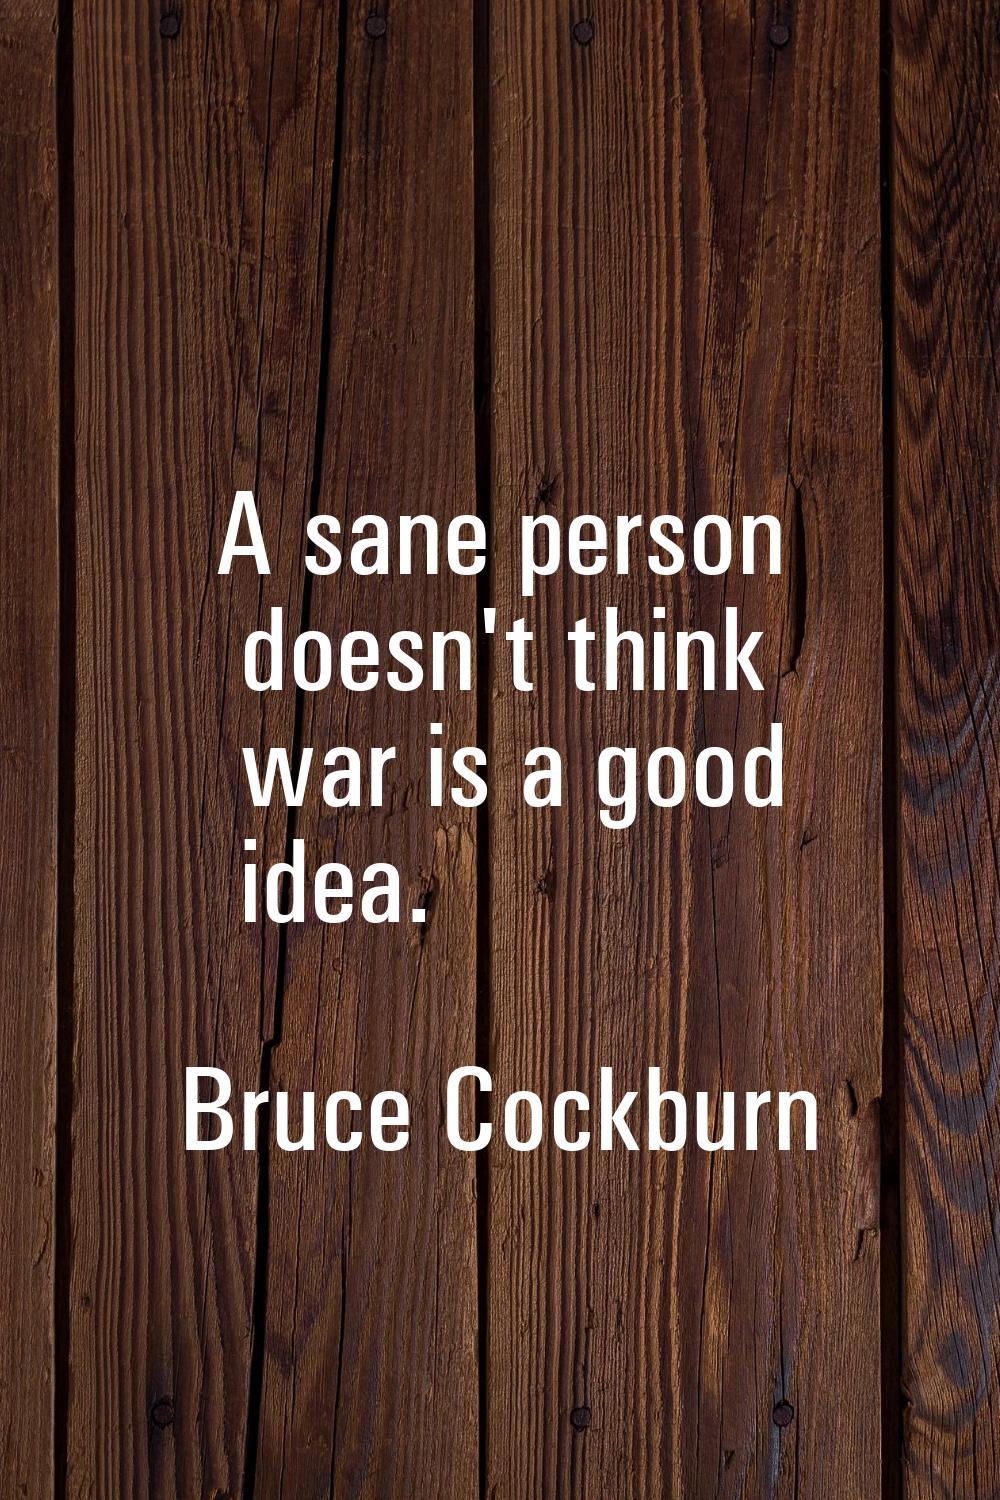 A sane person doesn't think war is a good idea.